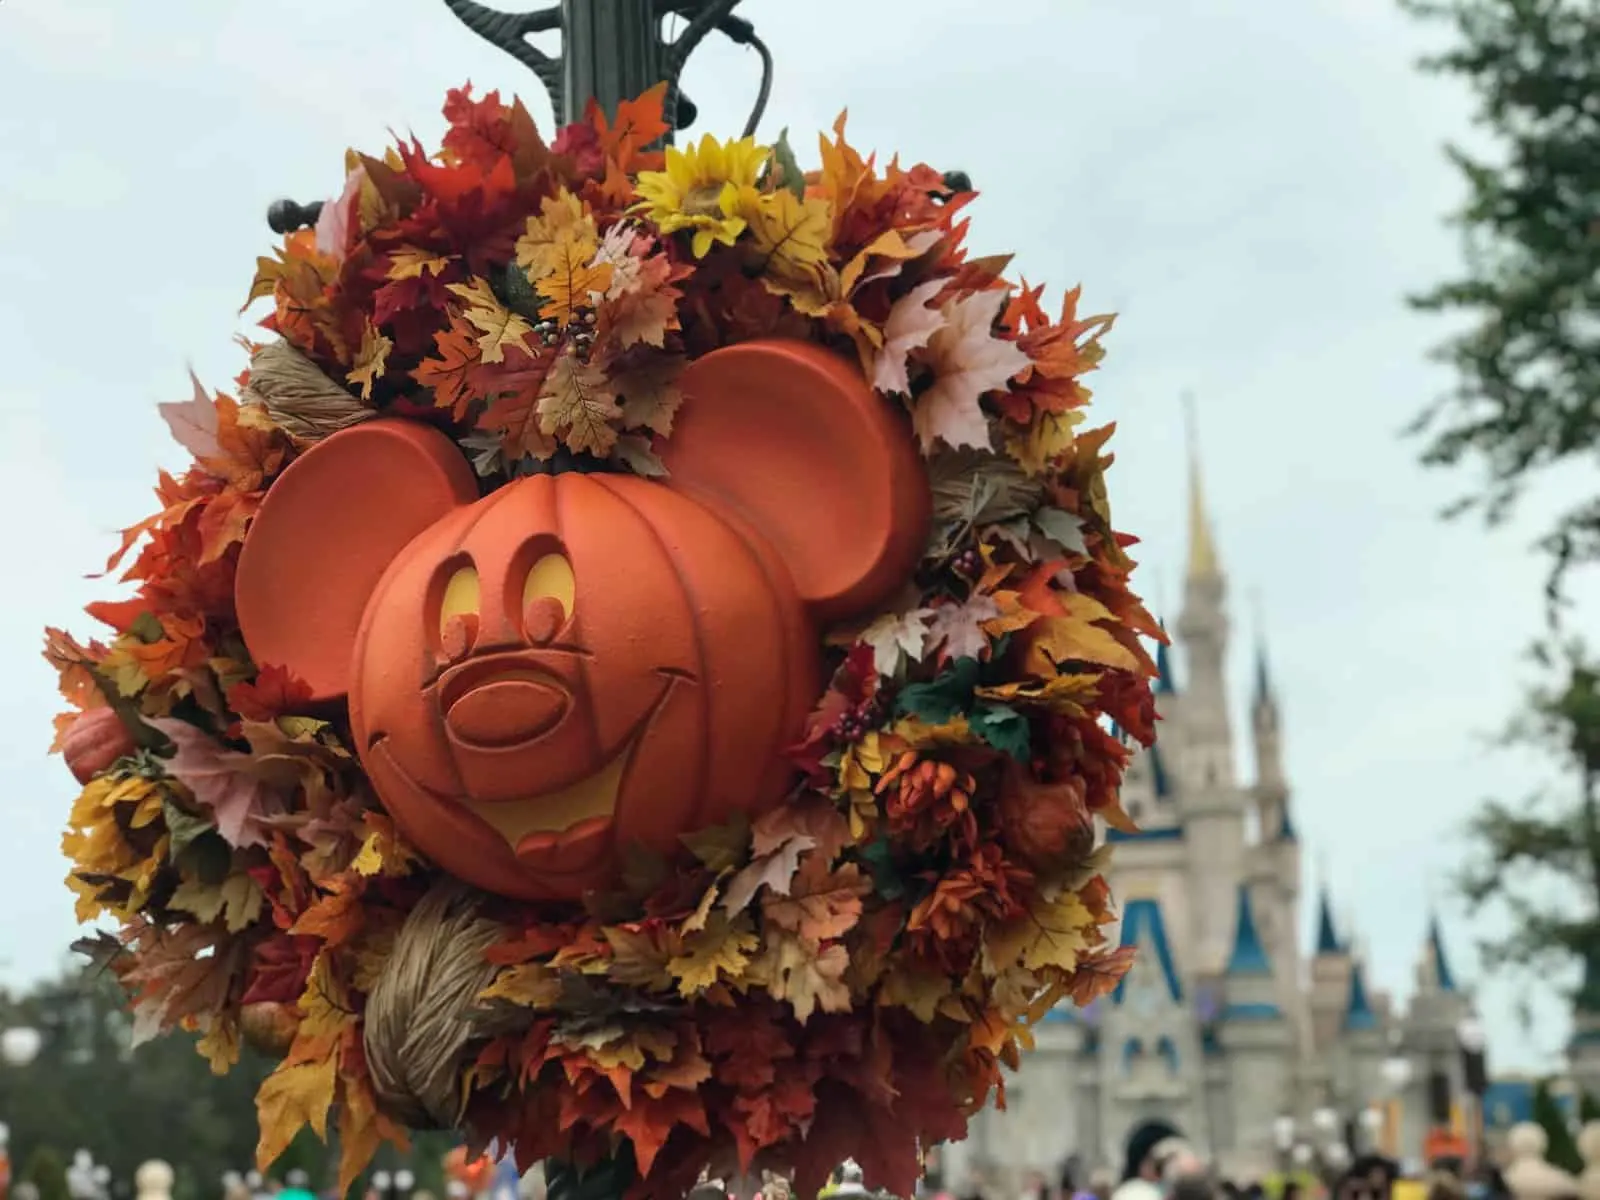 What to wear to Mickey’s Not-So-Scary Halloween Party (Rules & Costume Ideas)